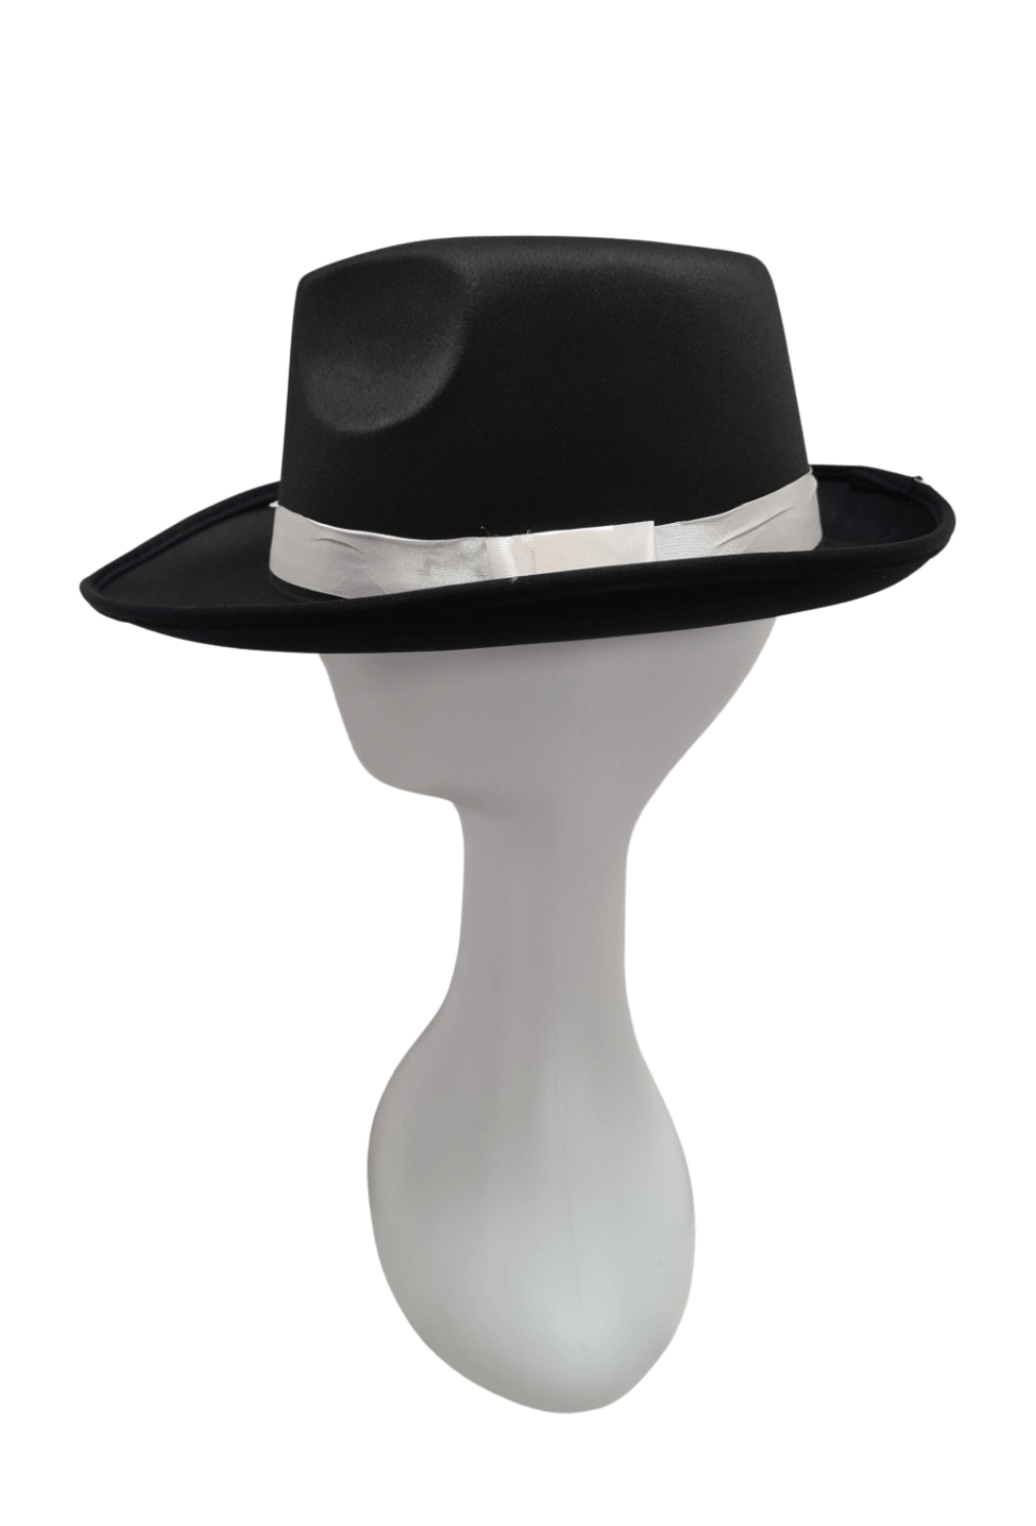 Featured image for “Fedora Hat”